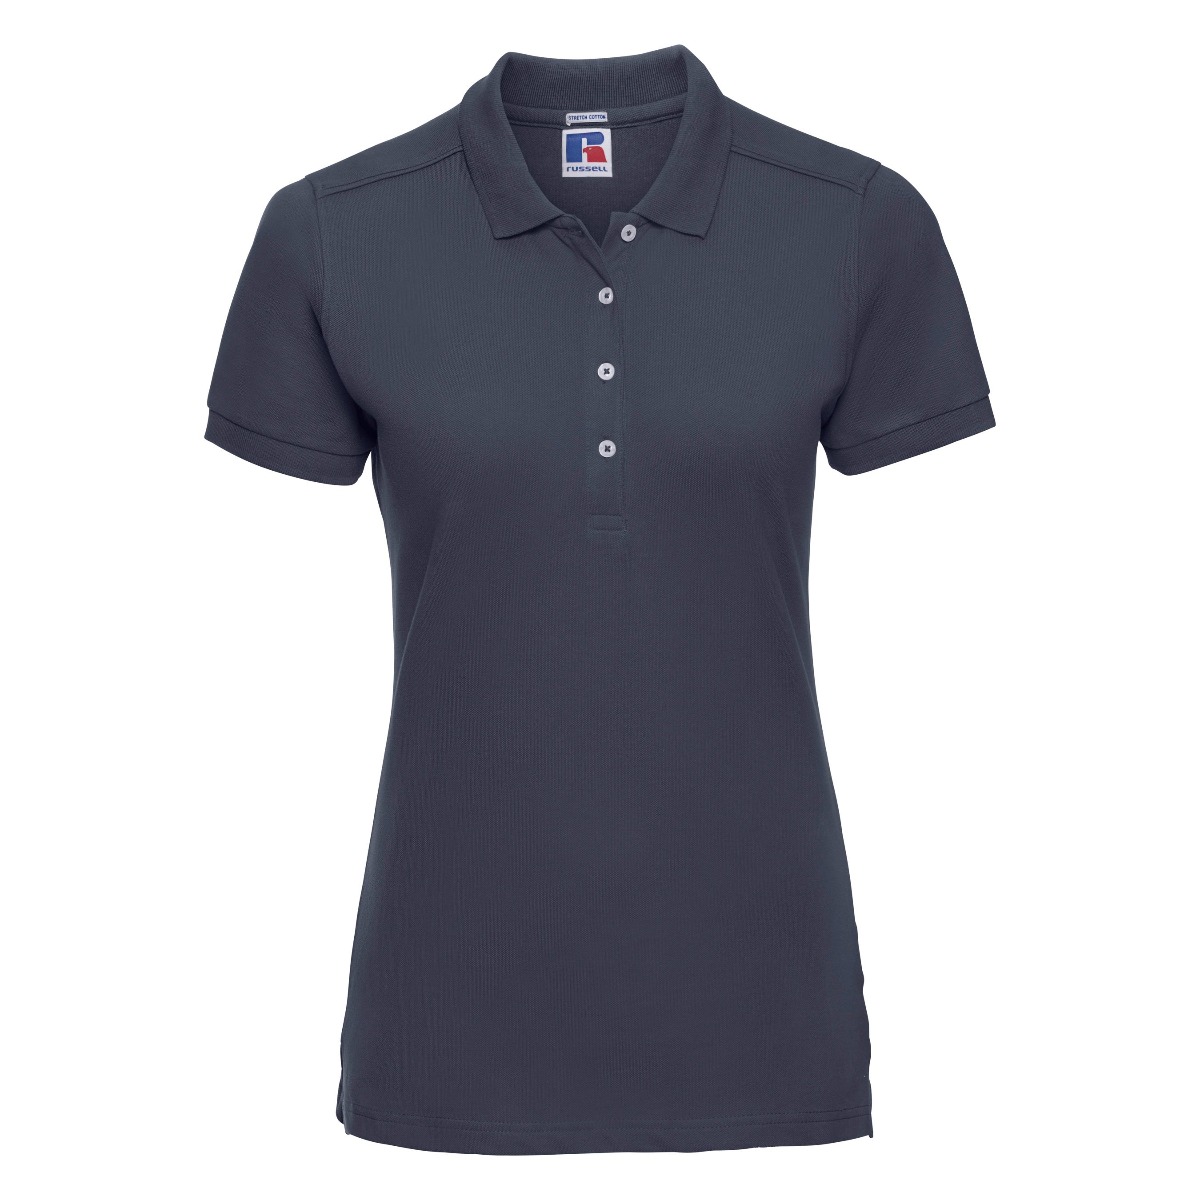 ax-httpswebsystems.s3.amazonaws.comtmp_for_downloadrussell-womens-stretch-french-navy_5.jpg